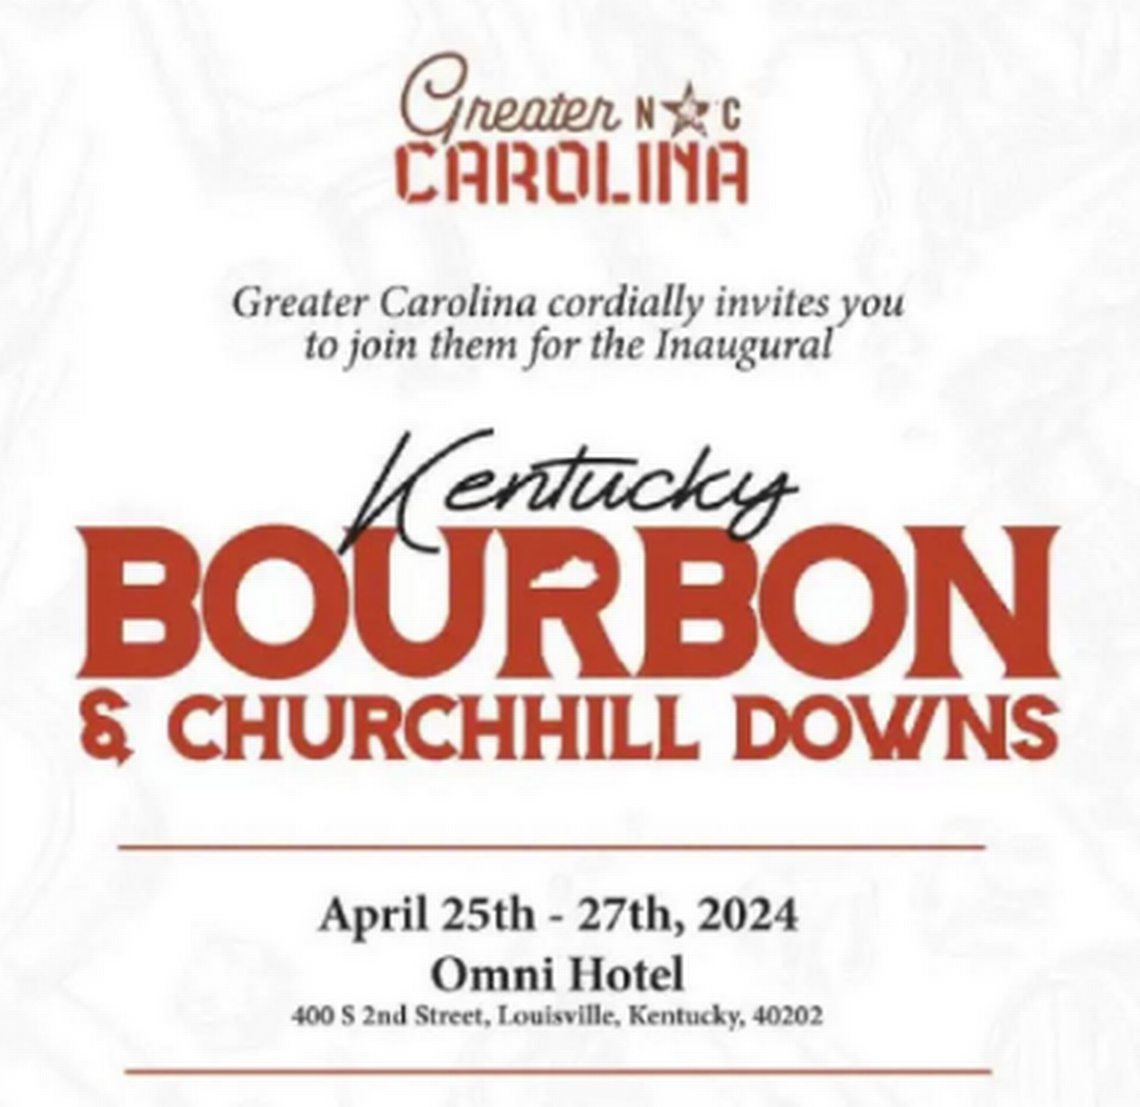 A screen grab of an invitation from Greater Carolina